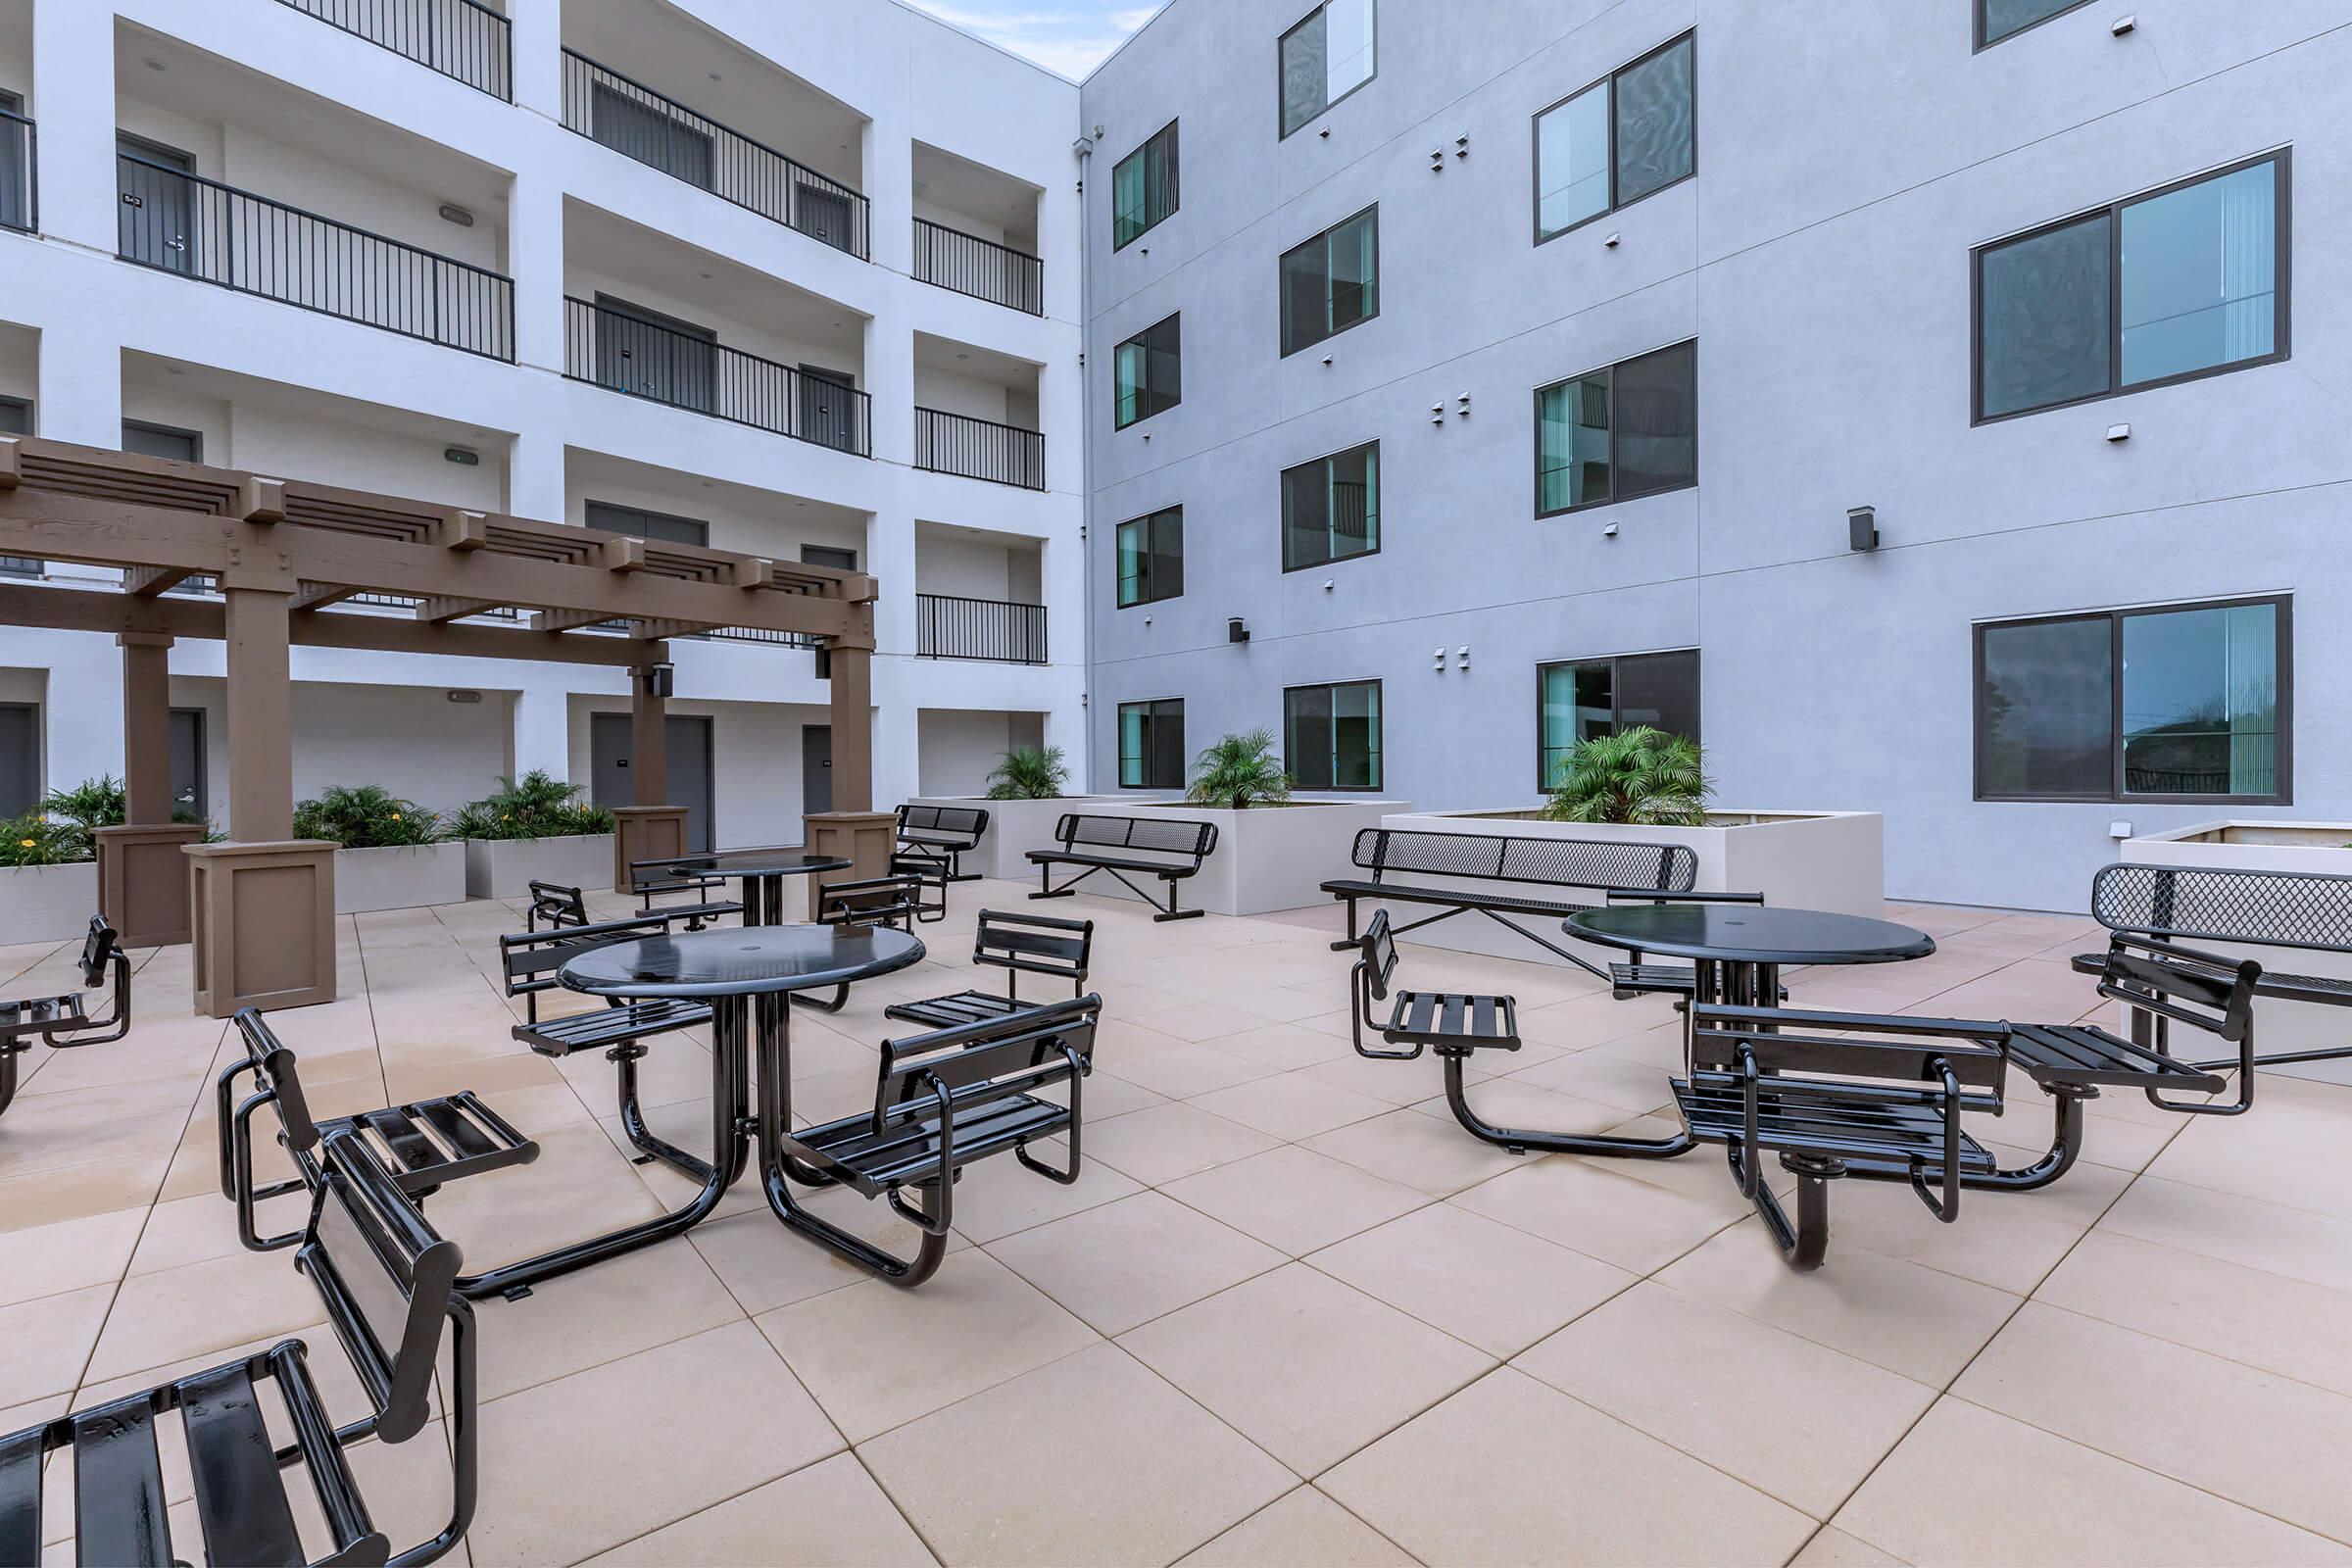 Apartments in Daly City CA-Brunswick Street Outdoor Seating with Lots of Tables and Chairs and Beatufiul Plants